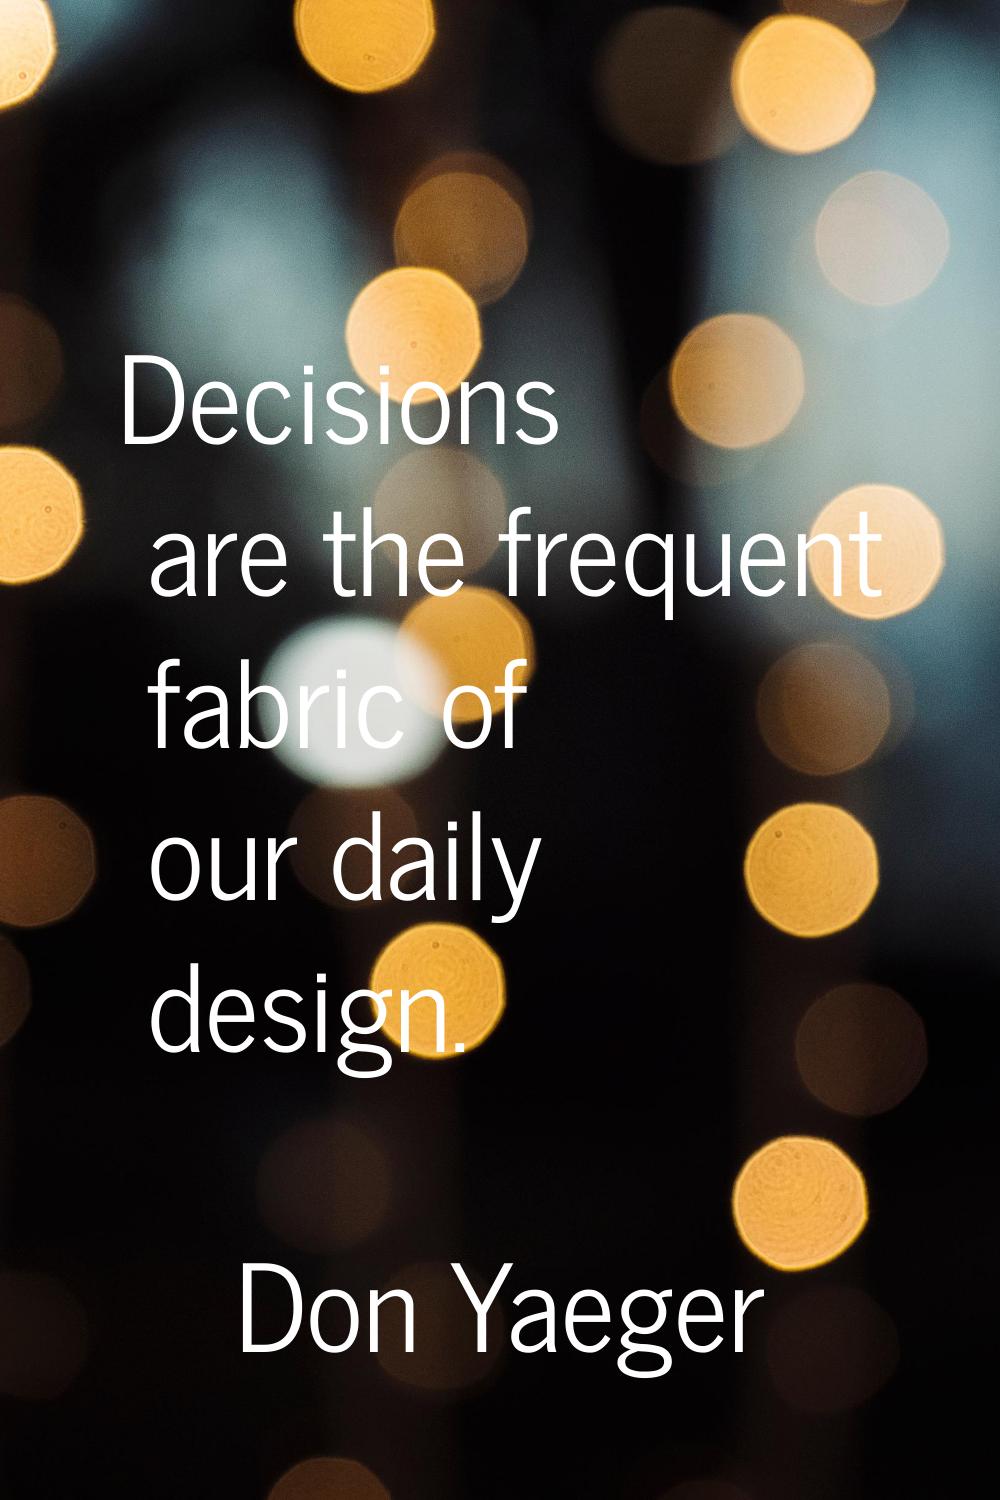 Decisions are the frequent fabric of our daily design.